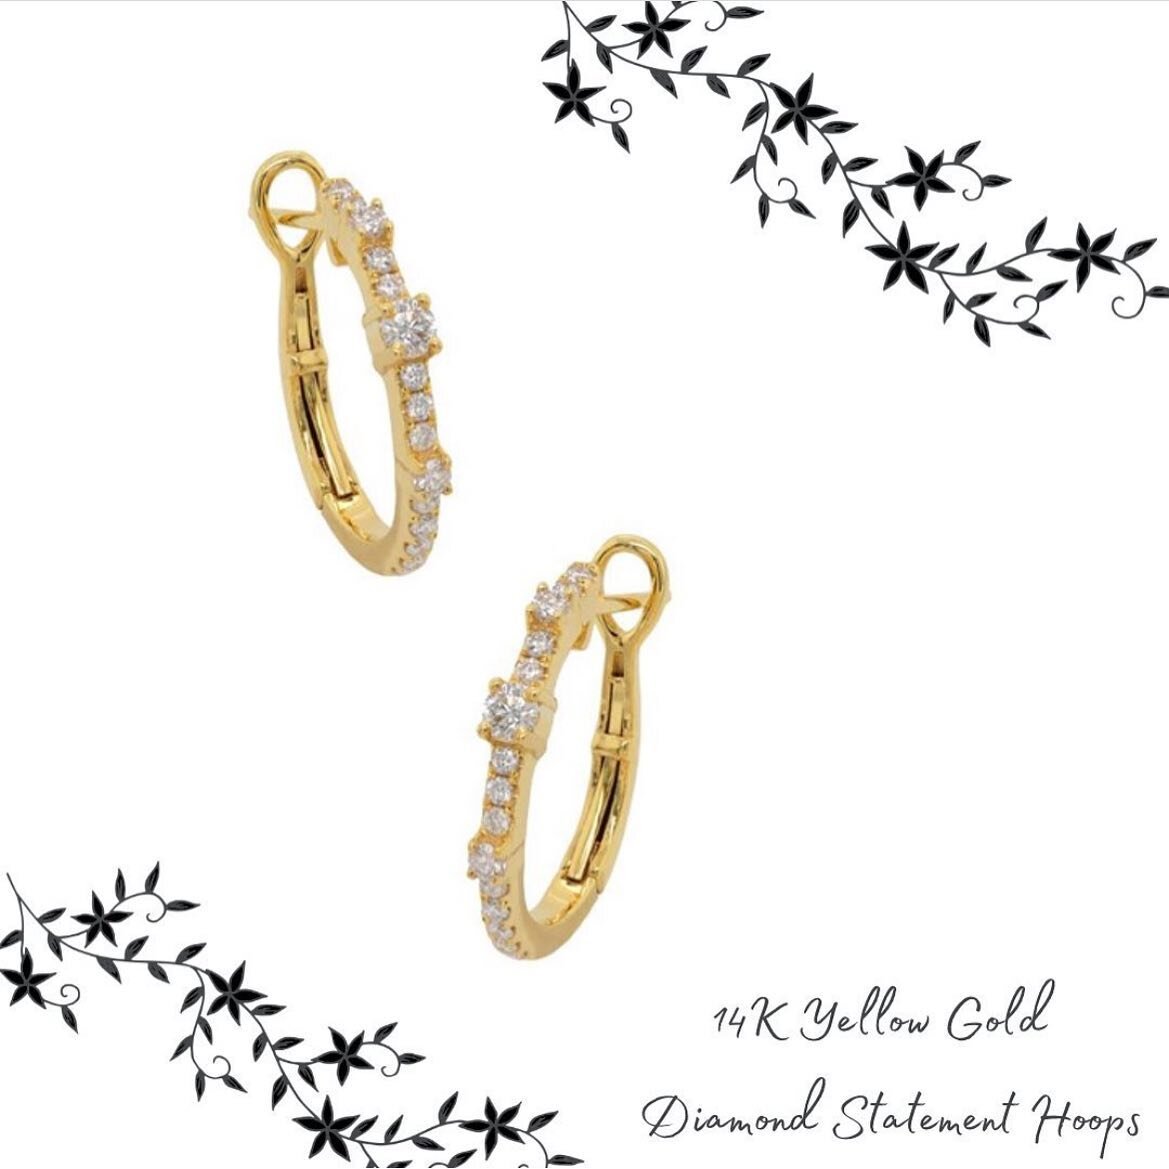 💎Dazzling Diamonds💎

✨Discover The Gold Collection at Nava Dee.

✨14k Yellow Gold Diamond Statement Hoops.

📖Want to see our full look book? Send us a DM!

#jewelry #shopsmall #accessories #gold #earrings #trendy #handmadejewelry #necklace #lakewo